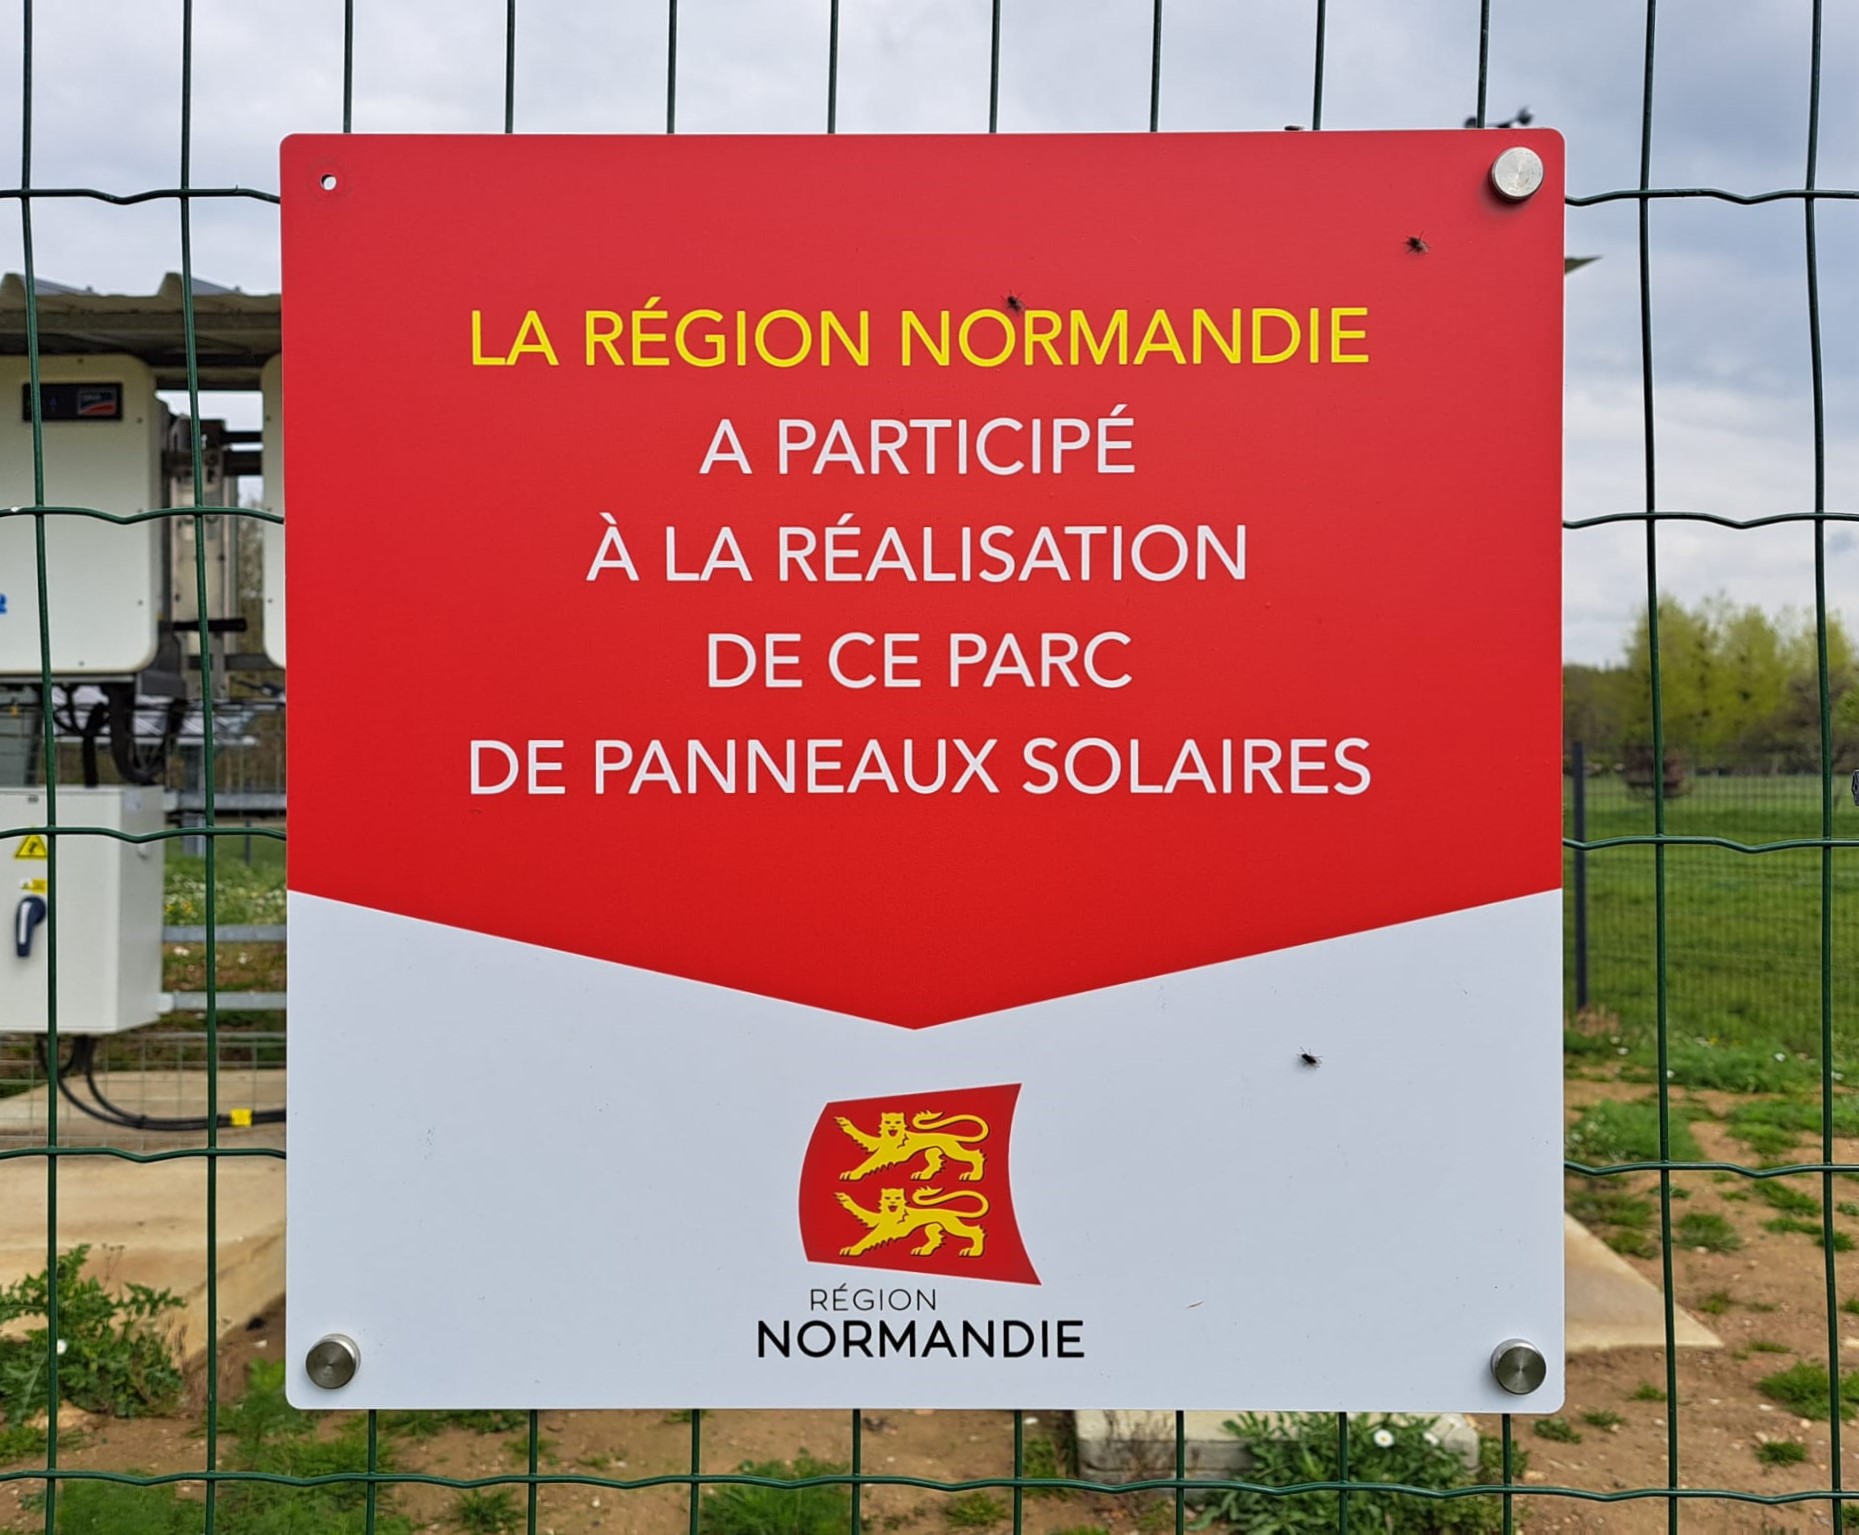 Poster highlighting the fact that the Normandy region participated in the realization of this project.